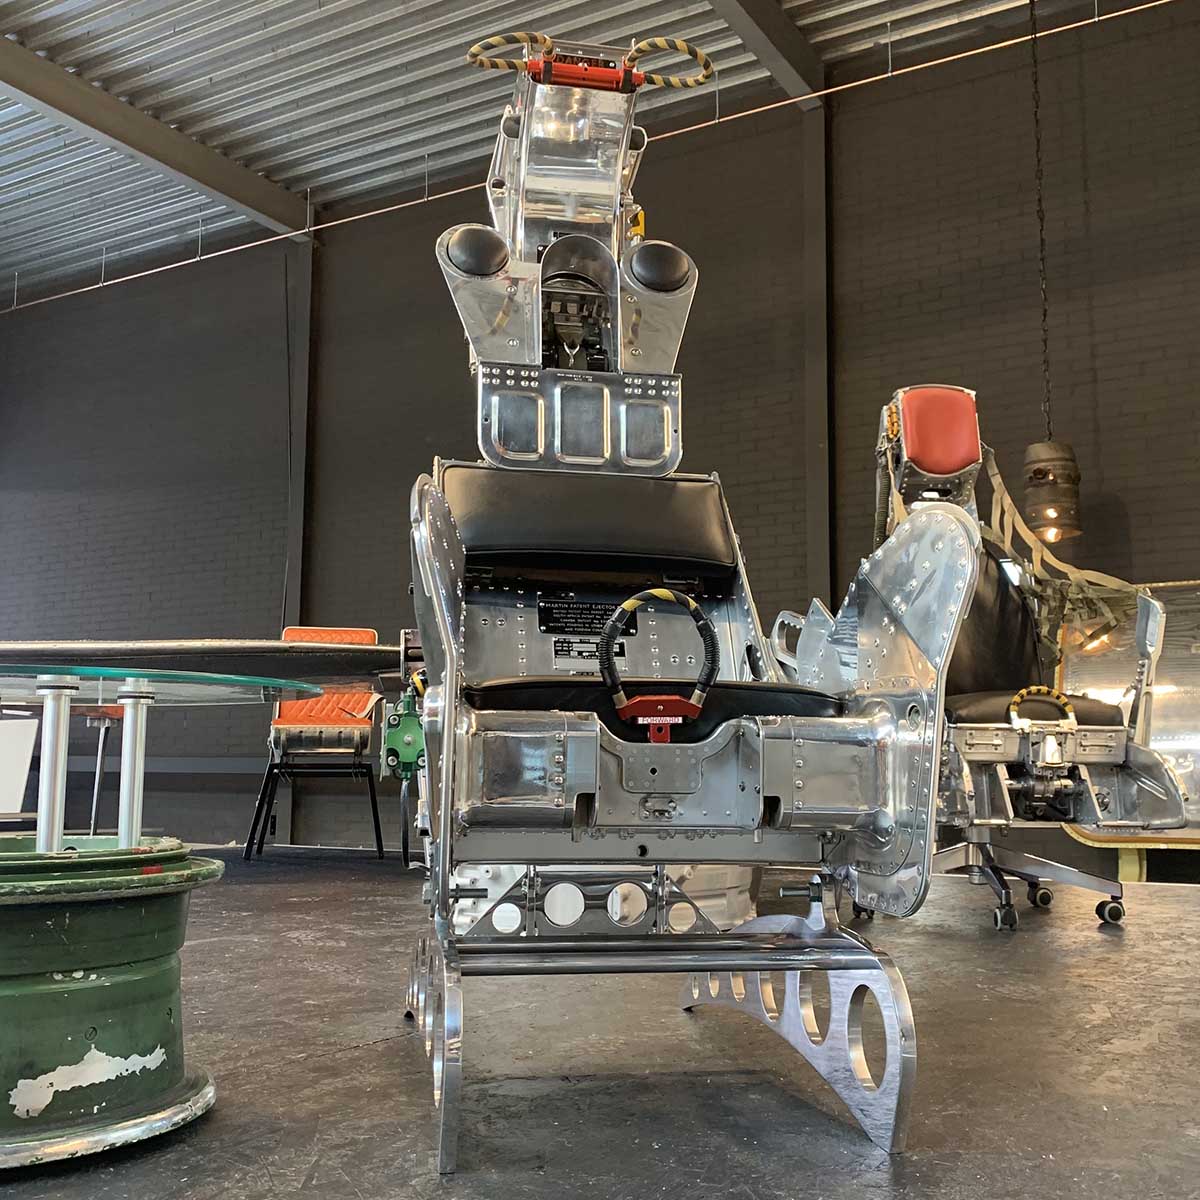 Mirror polished Martin-Baker Mk6 ejection seat for sale.